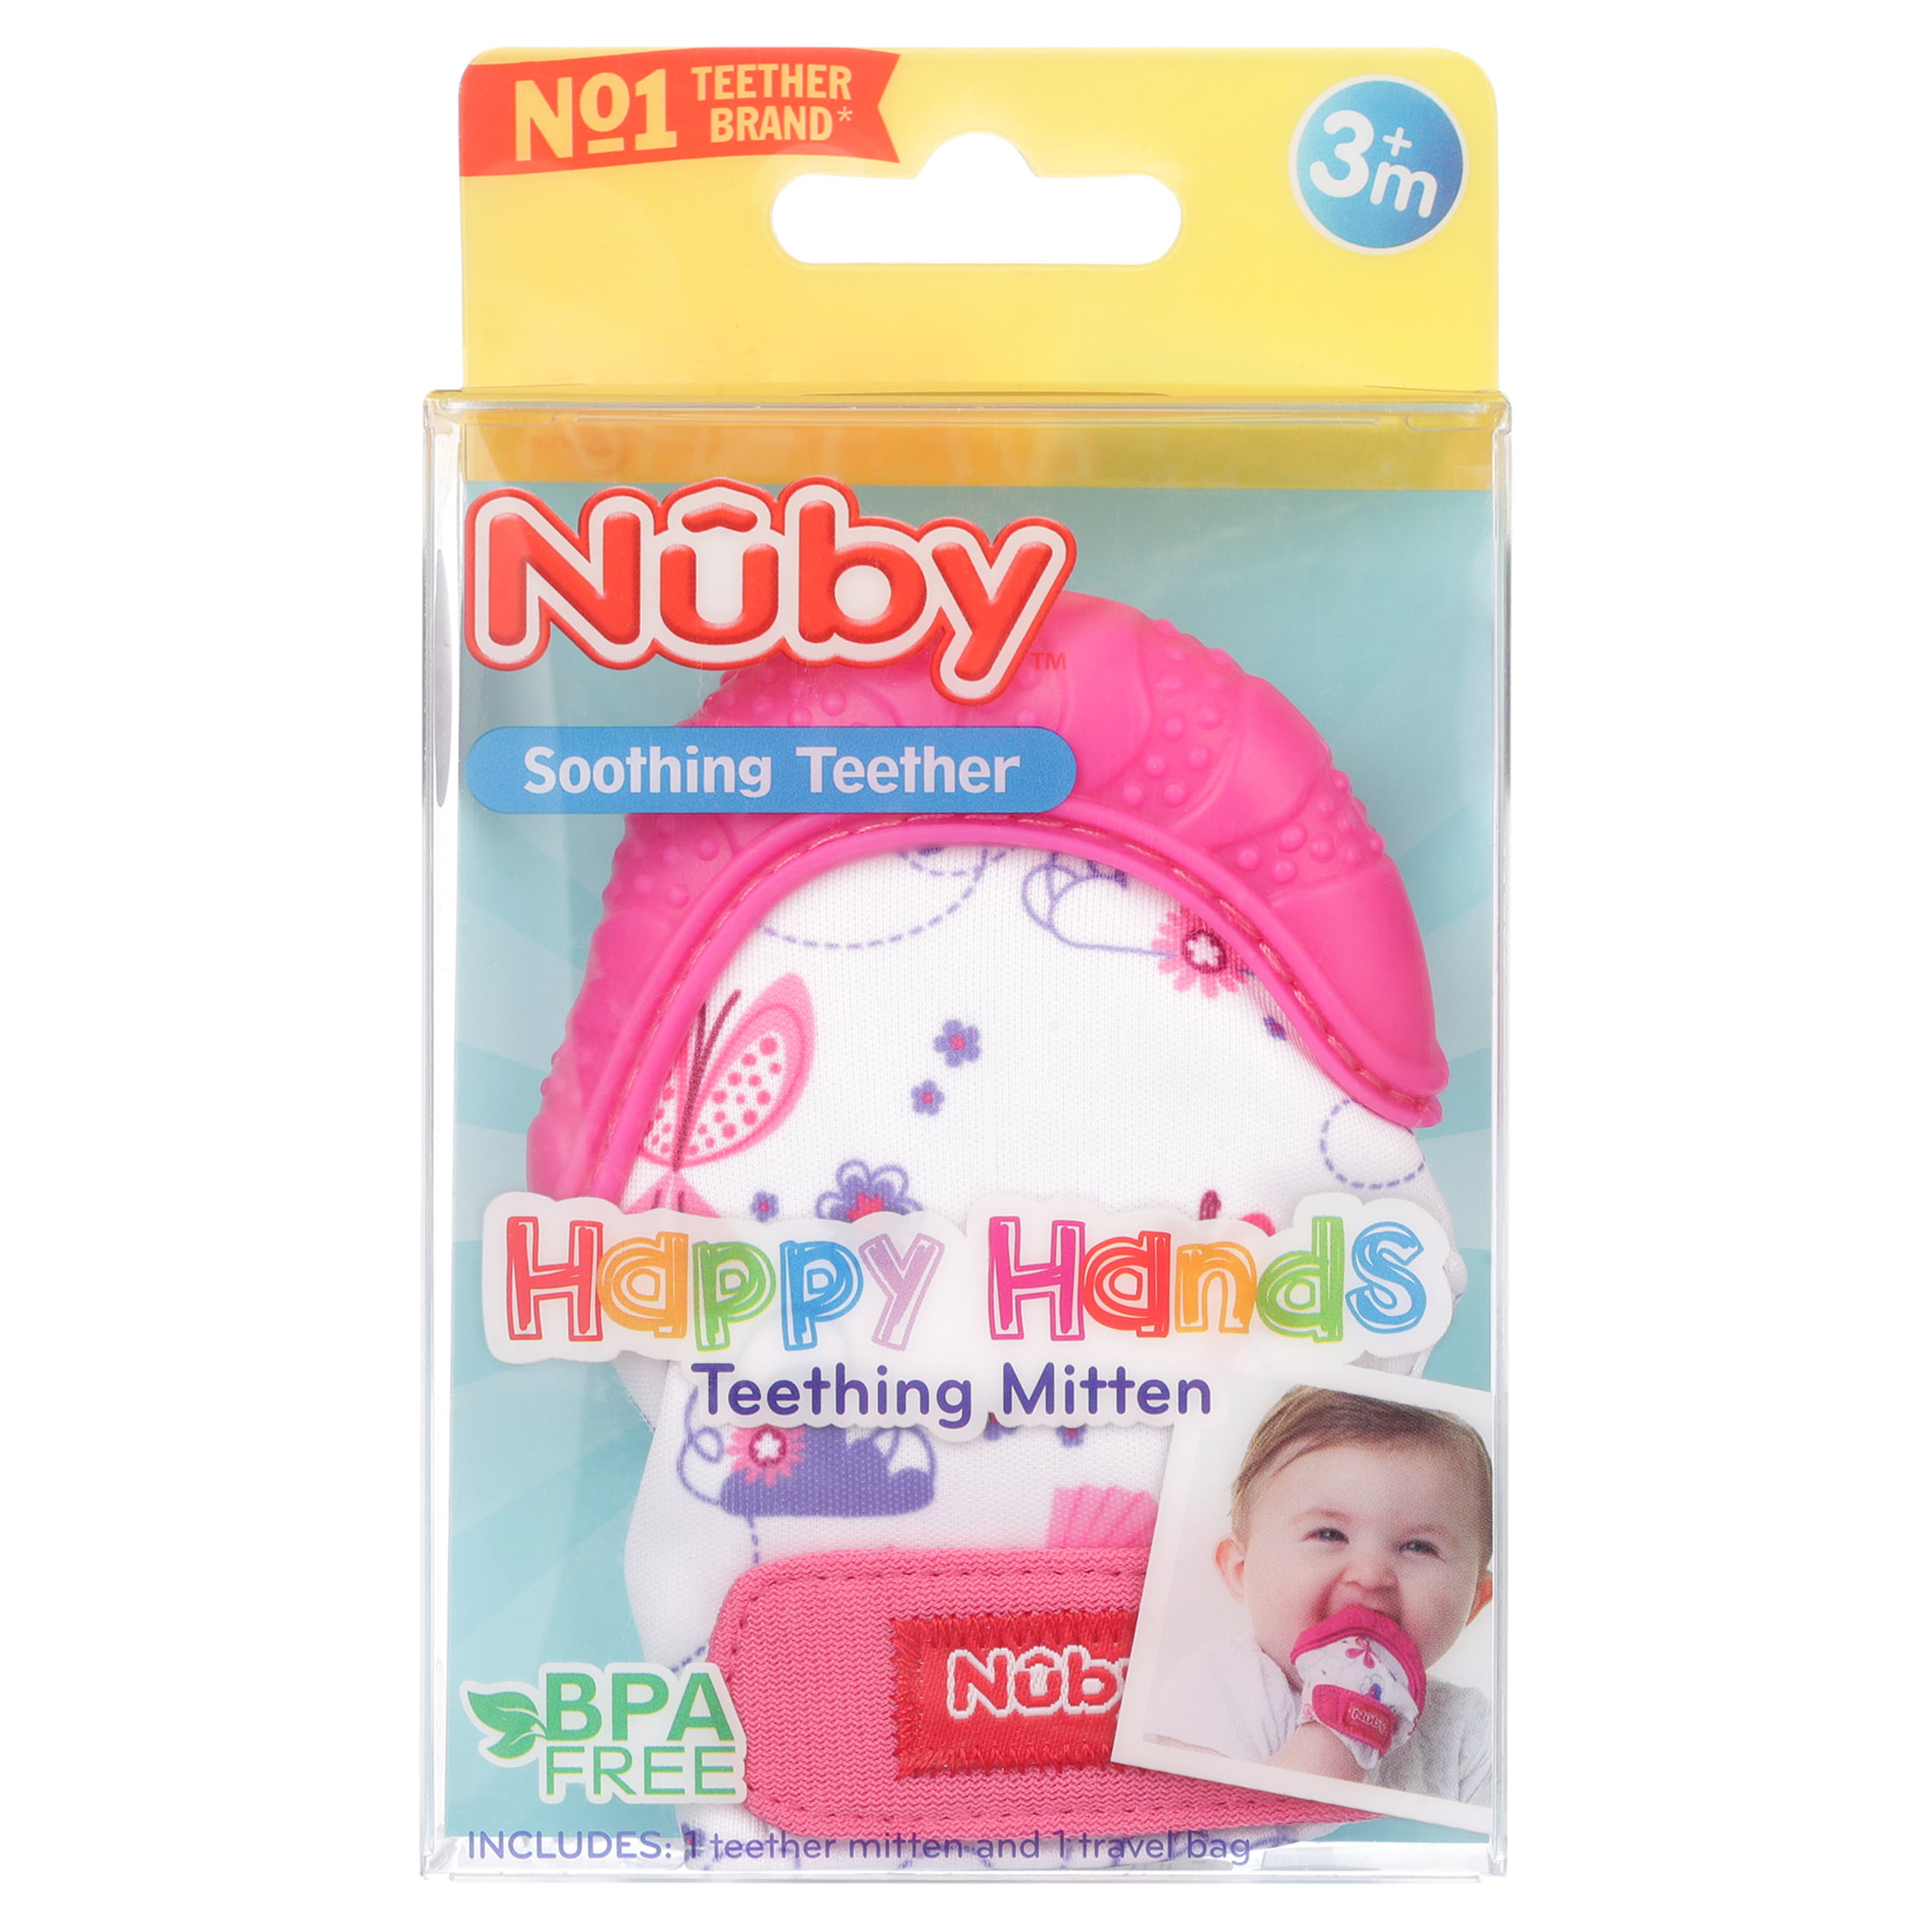 Aqual Owls Nuby Happy Hands Soothing Teething Mitten with Hygienic Travel Bag 